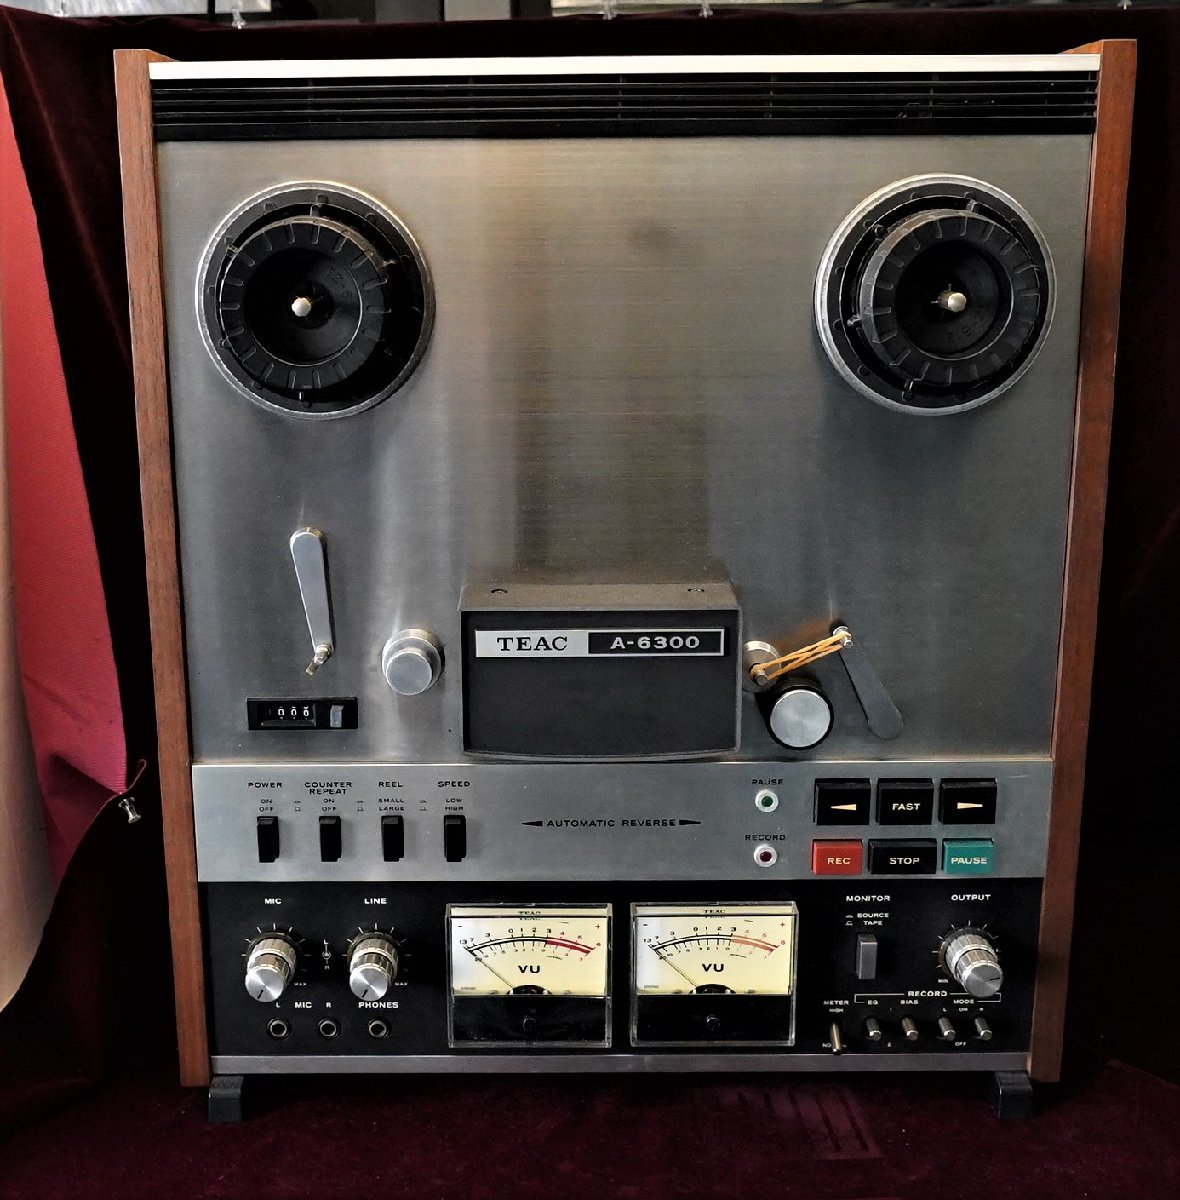 A&P●TEAC :A-6300:オープンデッキ：4TR2CH；1可能：OH済み